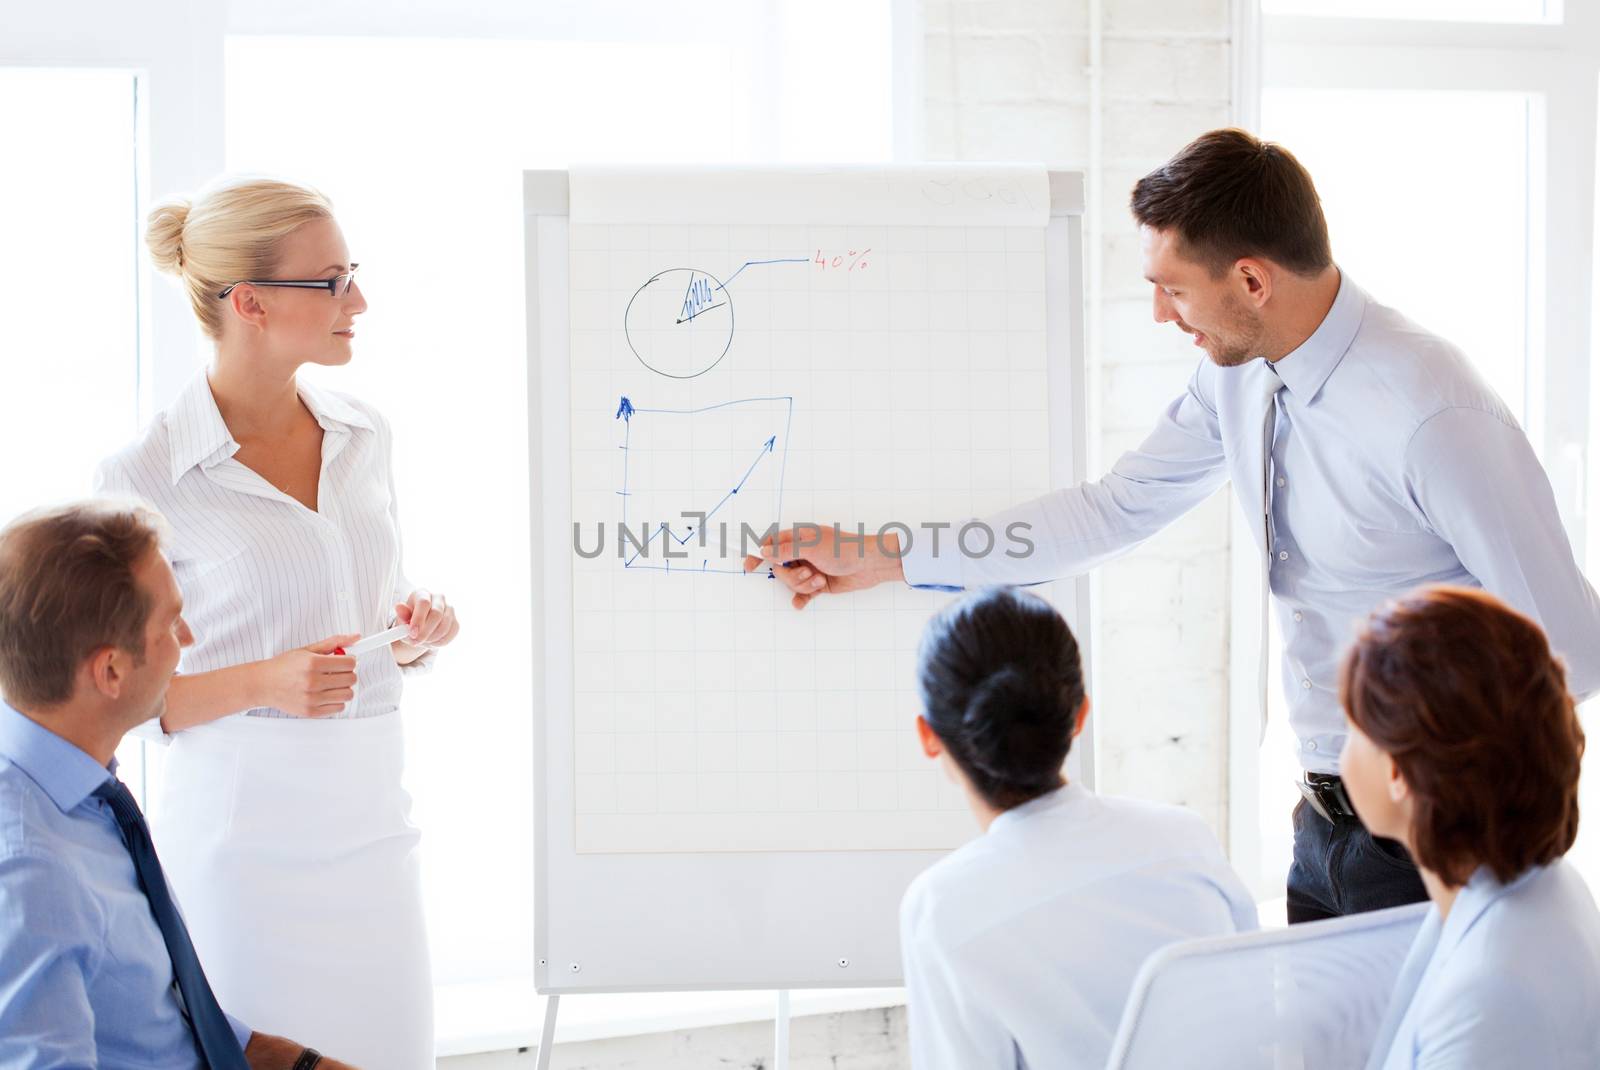 young businessman pointing at graph on flip board in office